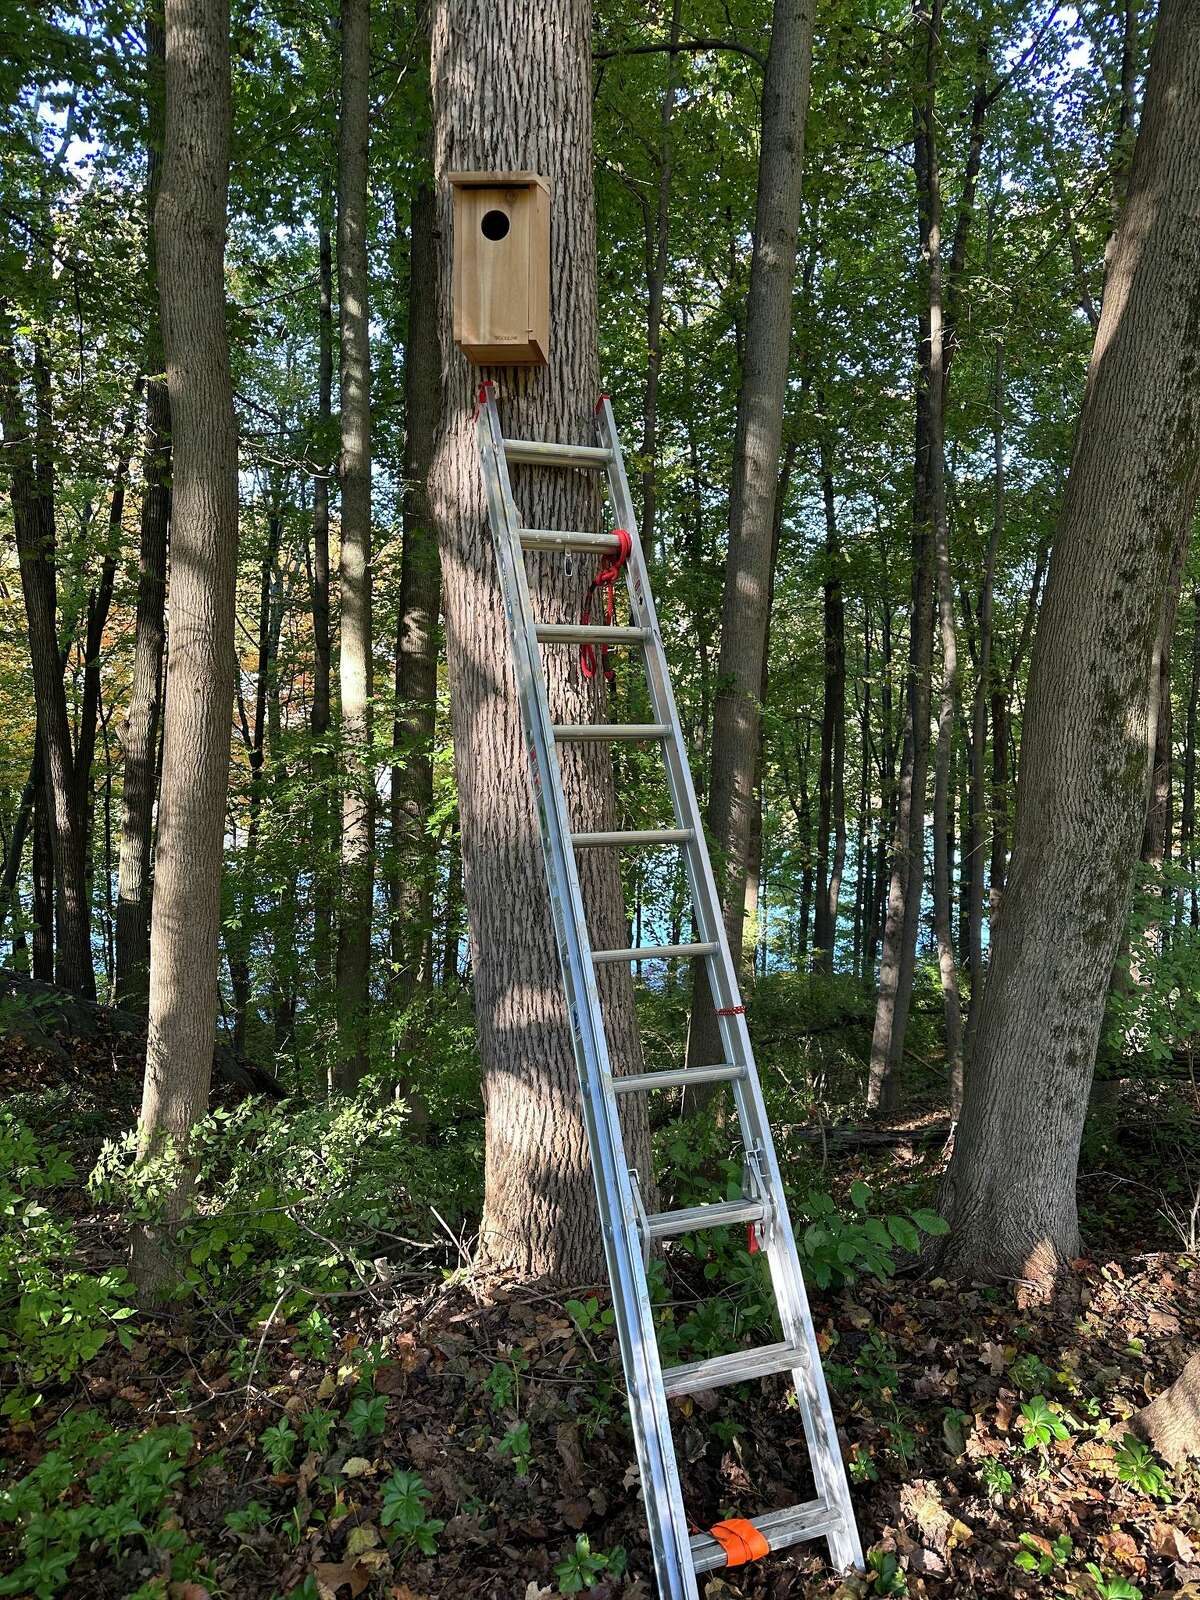 Through two grants from the Ridgefield Thrift Shop, the Ridgefield Conservation Commission has installed a new bird feeding station in Richardson Park as well as a dozen screech owl nest boxes.